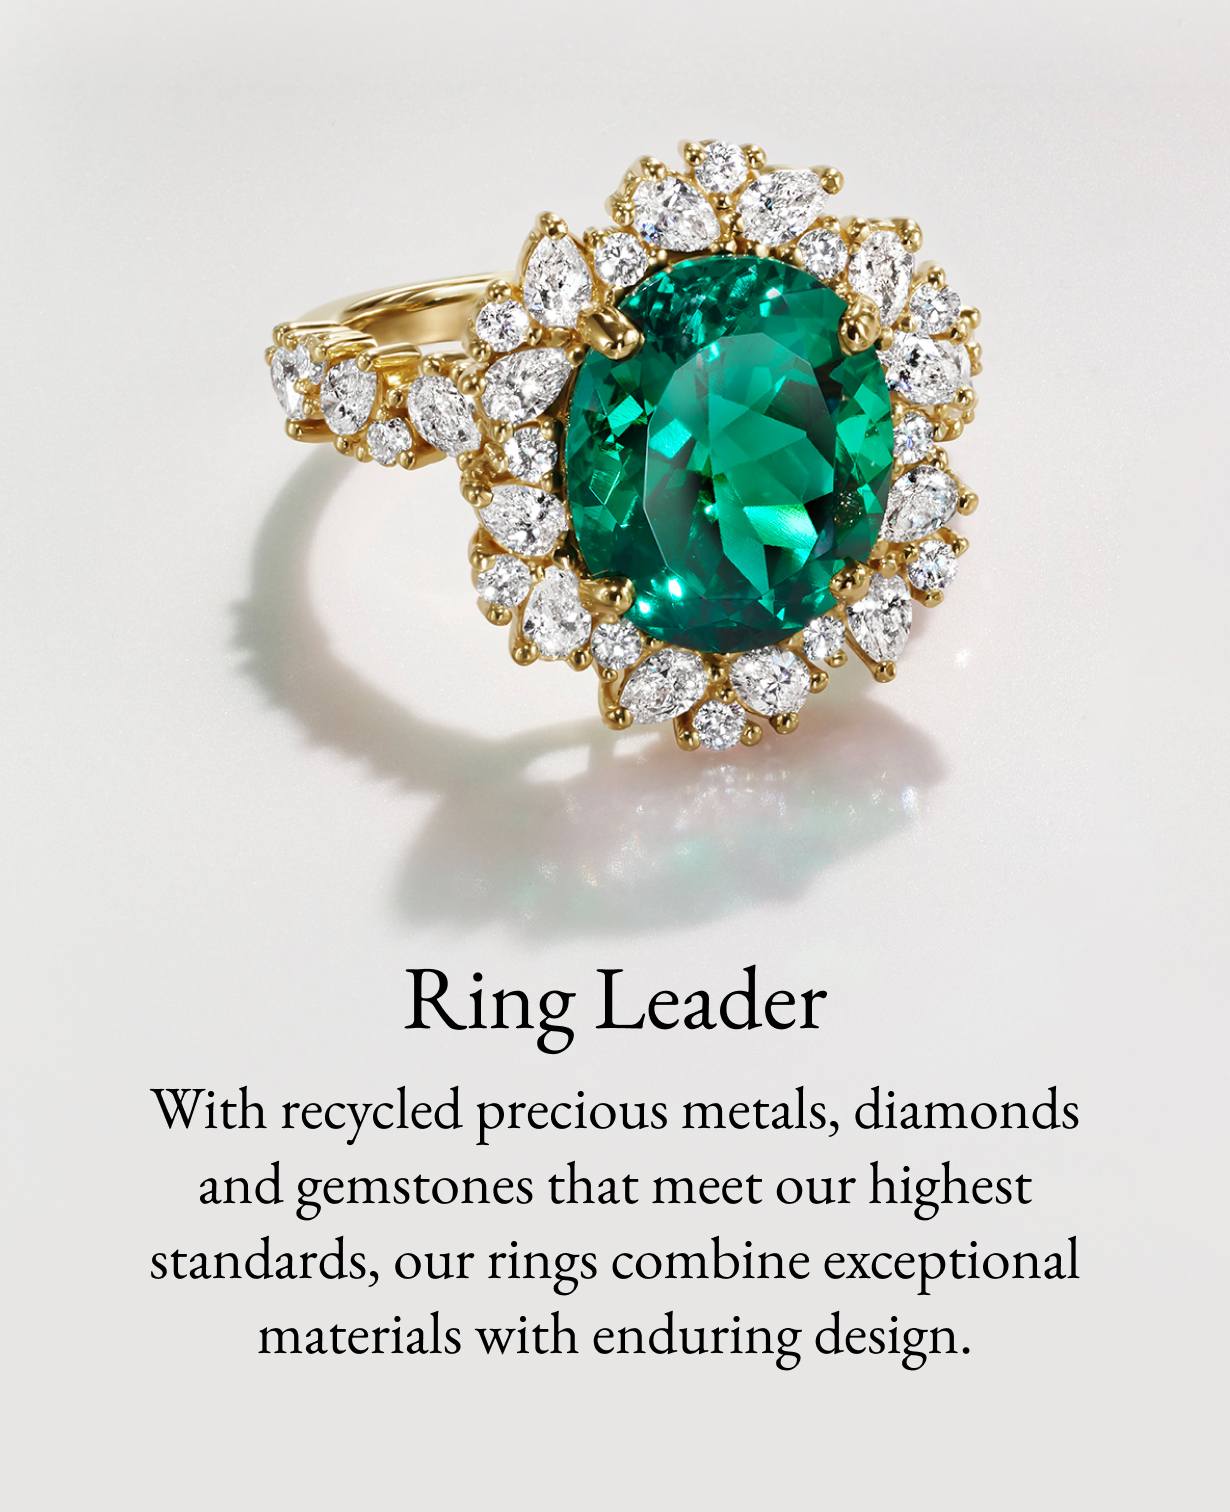 Emerald and diamond cocktail ring.